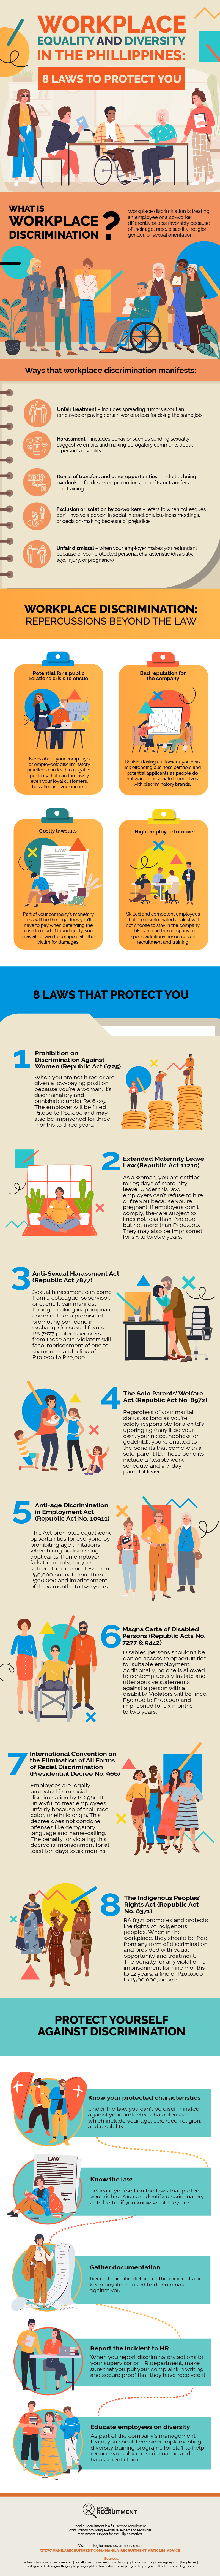 Workplace equality and diversity in the philippines : 8 laws to protect you infographic